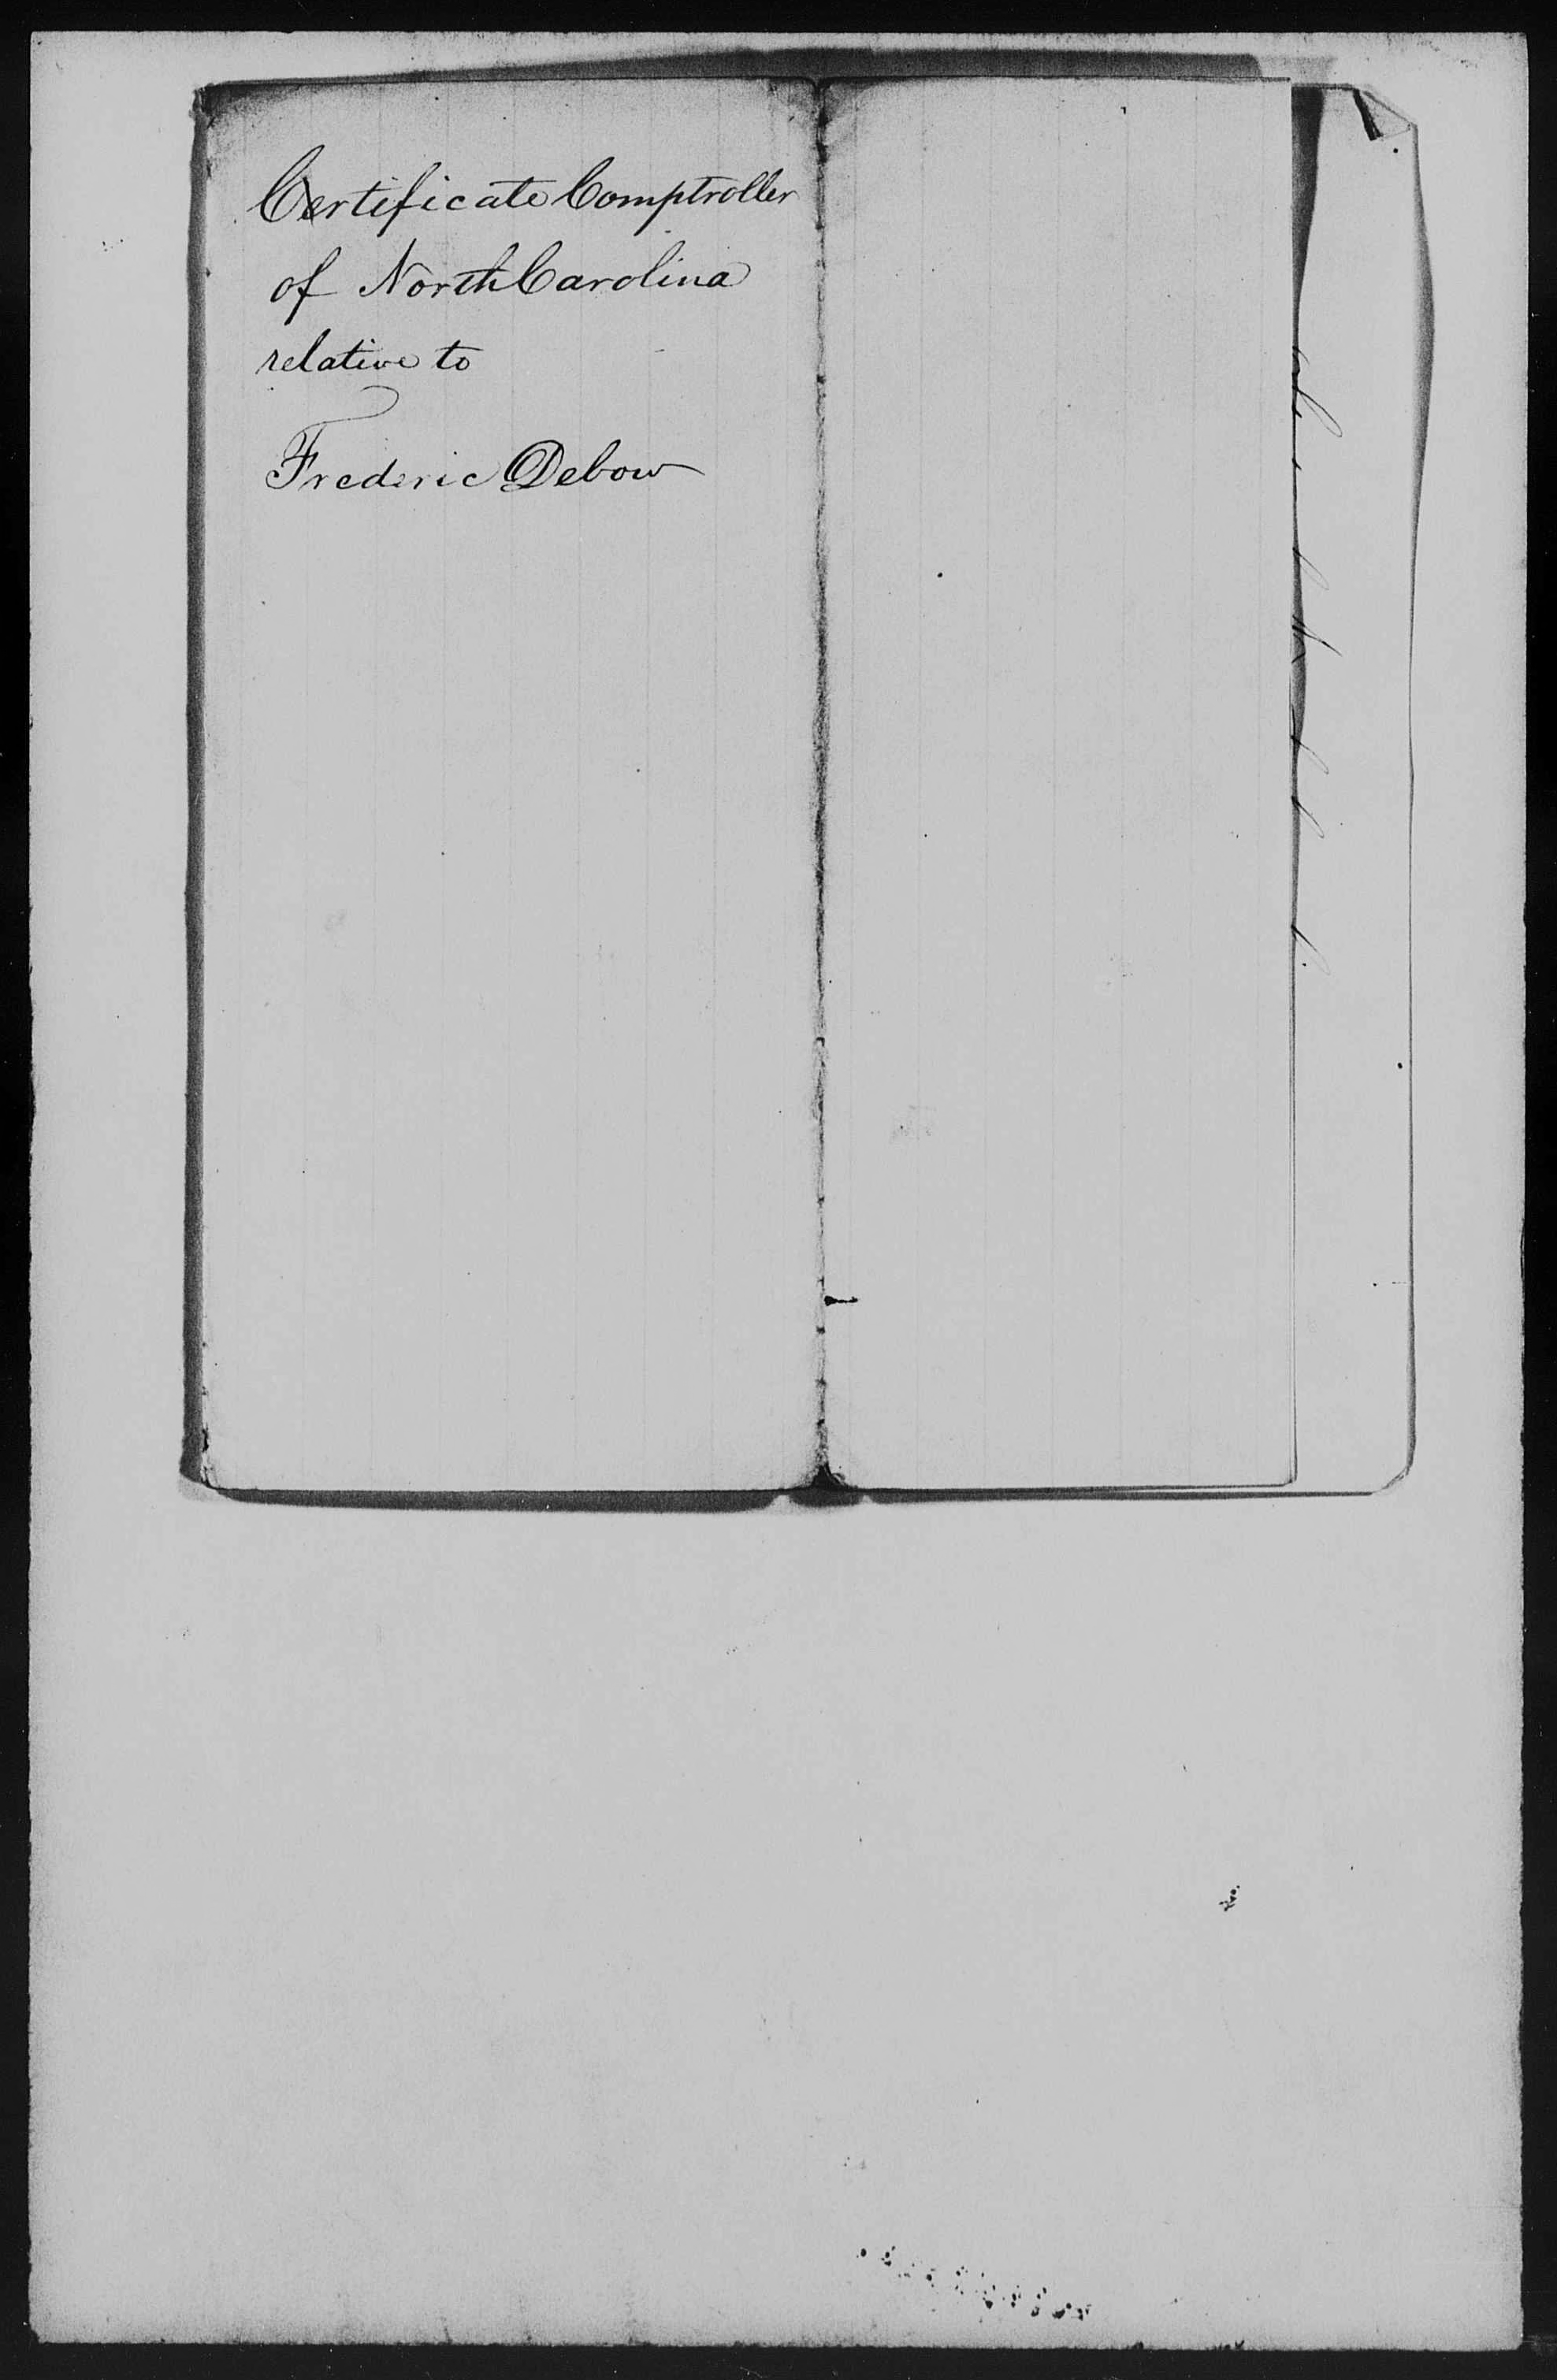 Proof of Service for William J. Clarke, 24 June 1851, page 2